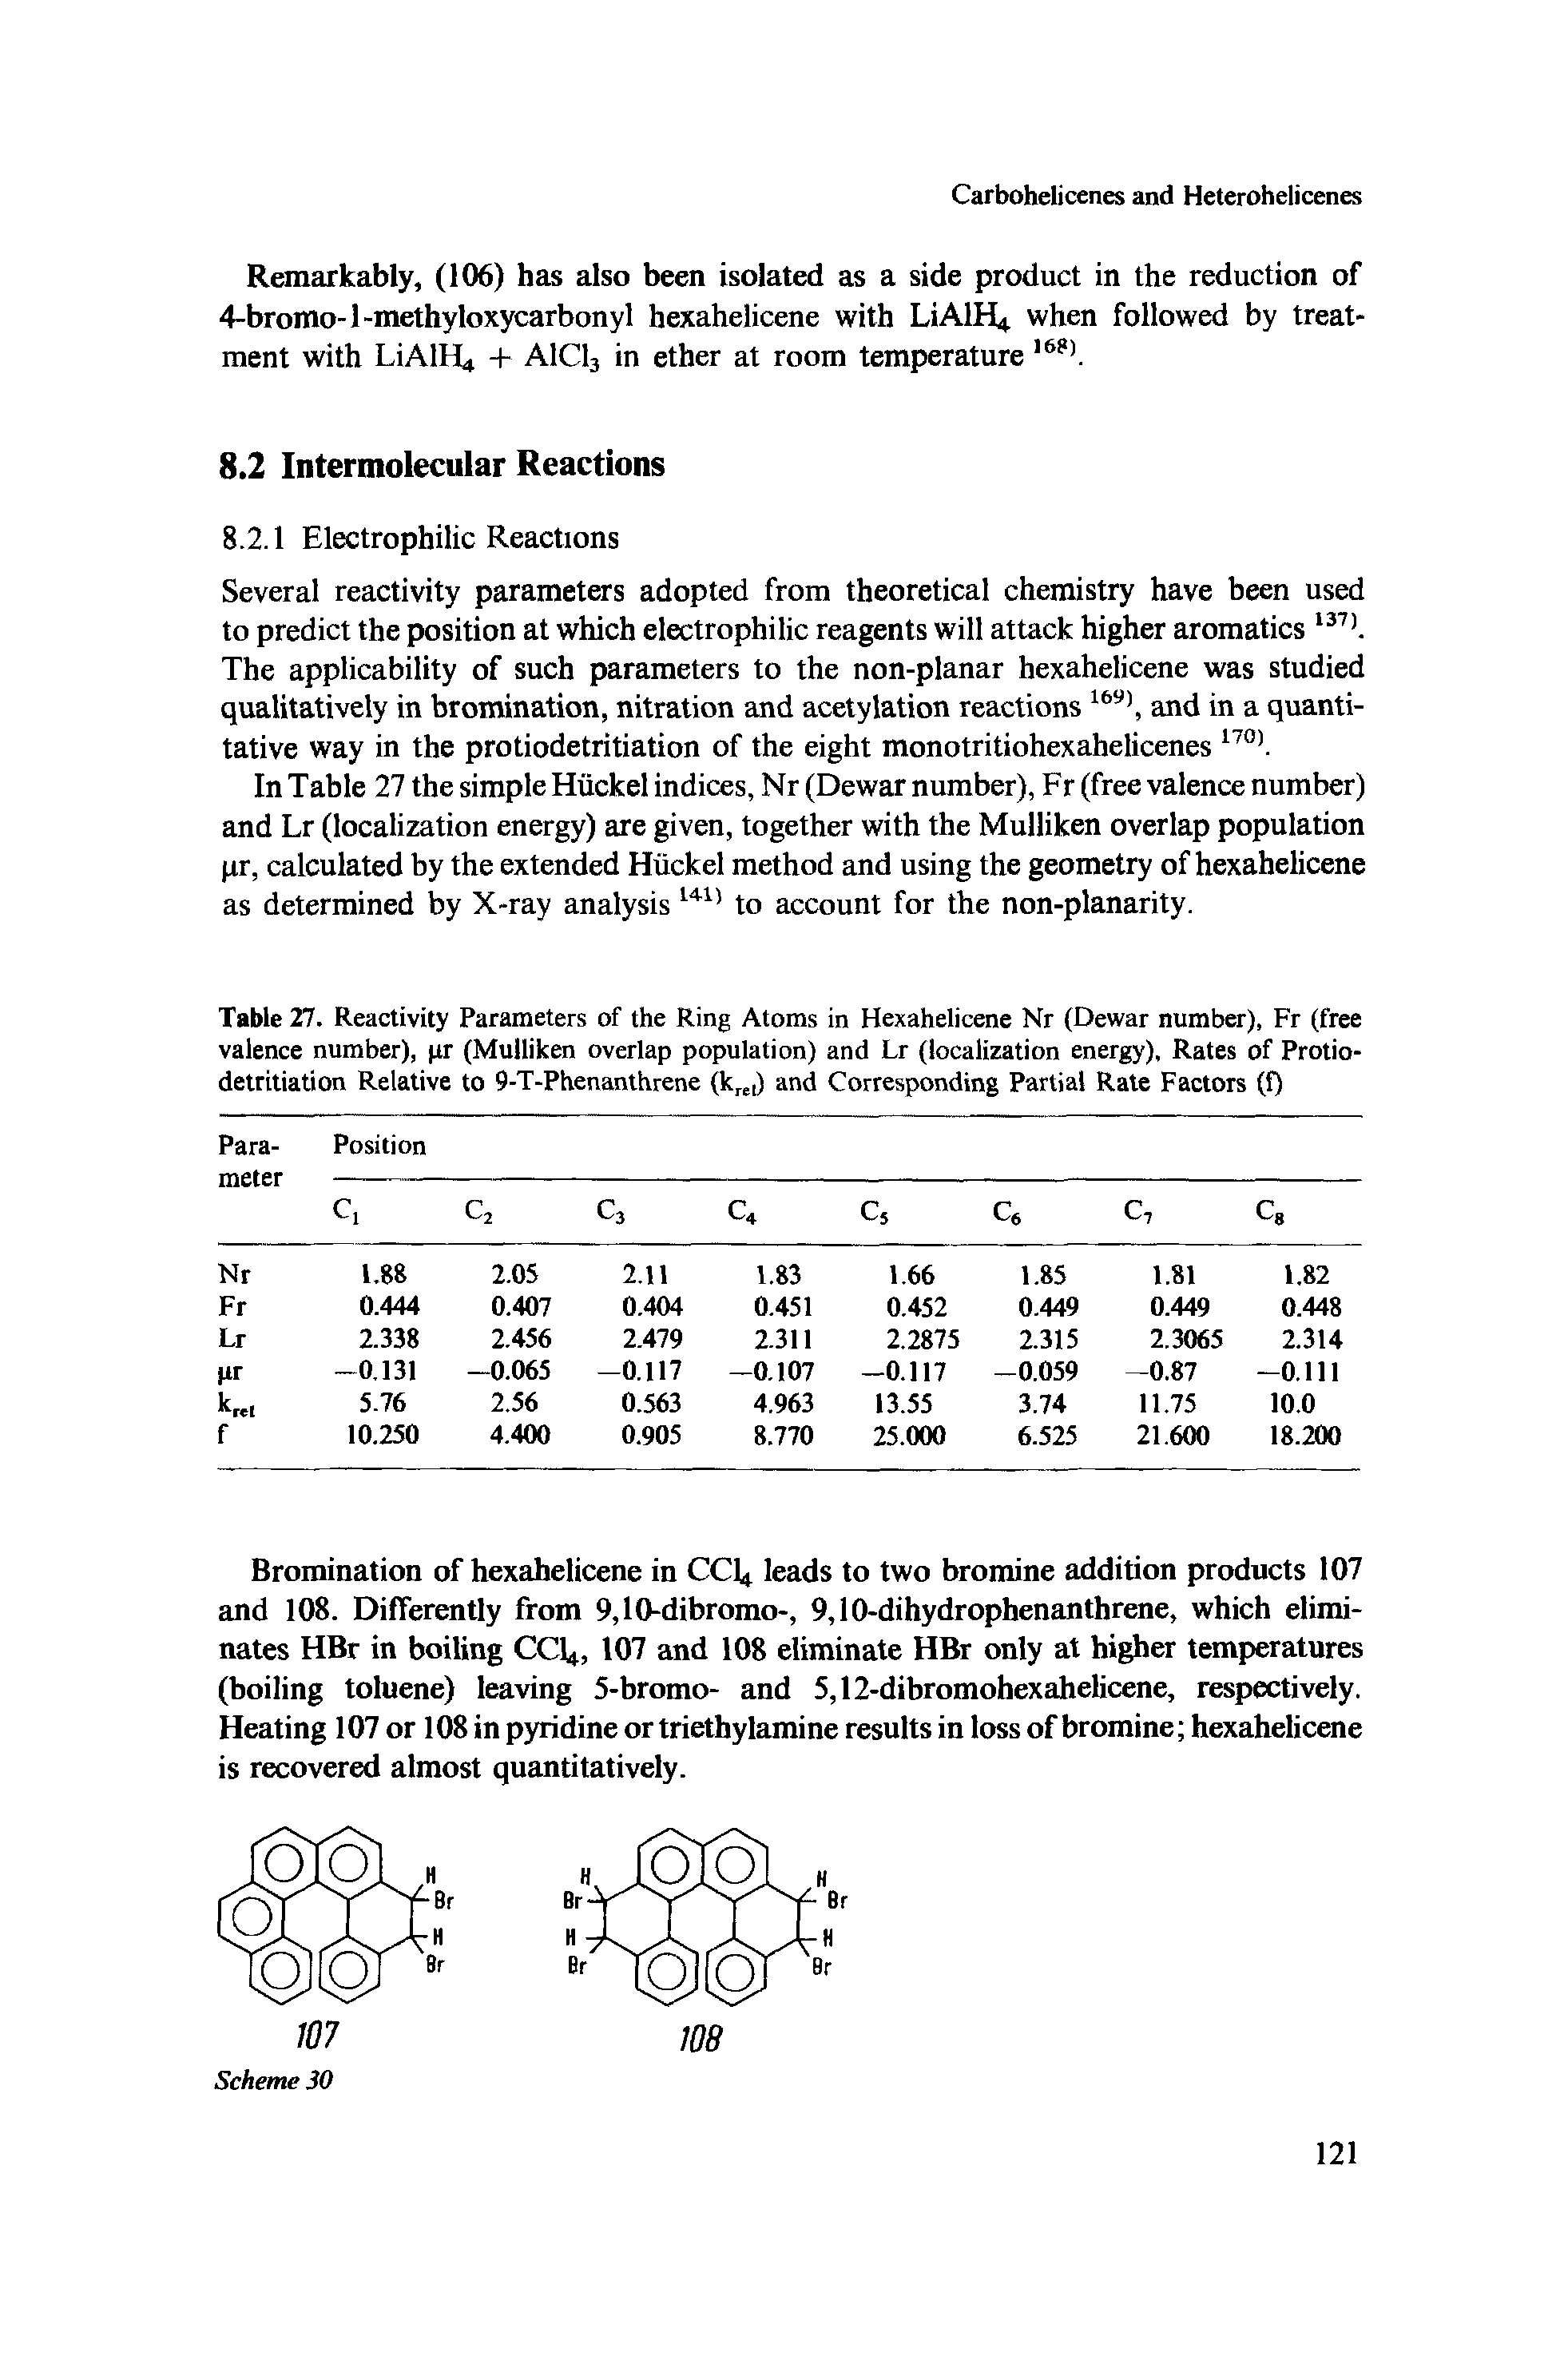 Table 27. Reactivity Parameters of the Ring Atoms in Hexahelicene Nr (Dewar number), Fr (free valence number), pr (Mulliken overlap population) and Lr (localization energy), Rates of Protiodetritiation Relative to 9-T-Phenanthrene (kre[) and Corresponding Partial Rate Factors (f)...